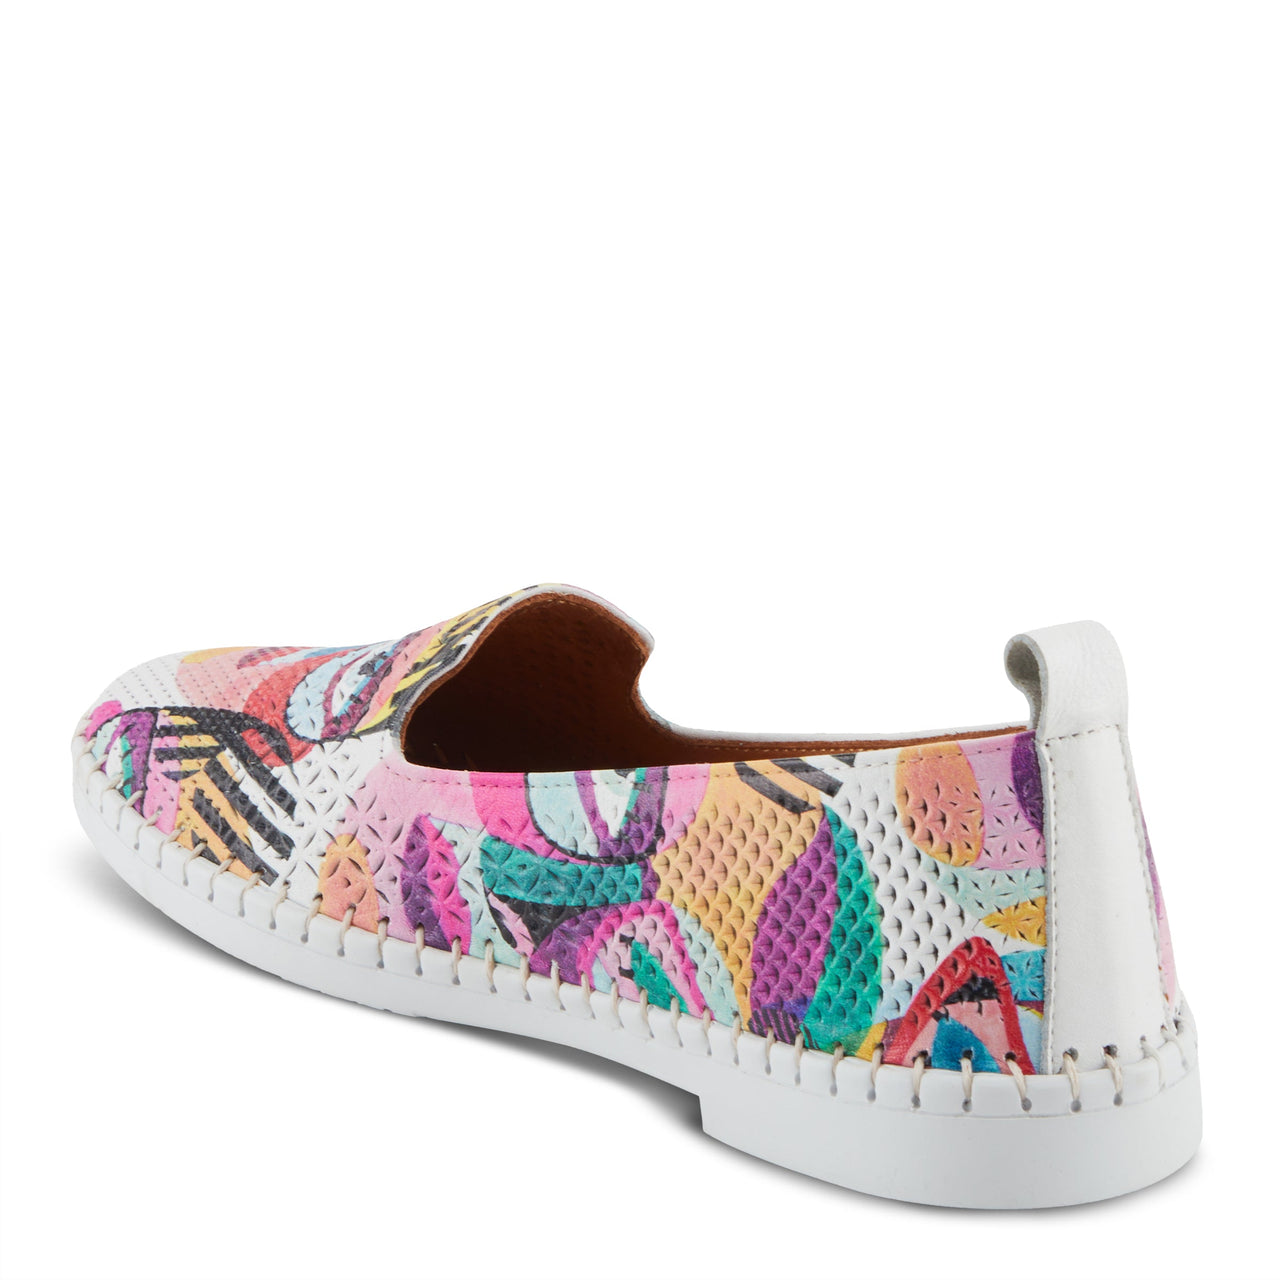 Spring Step Carraway Shoes